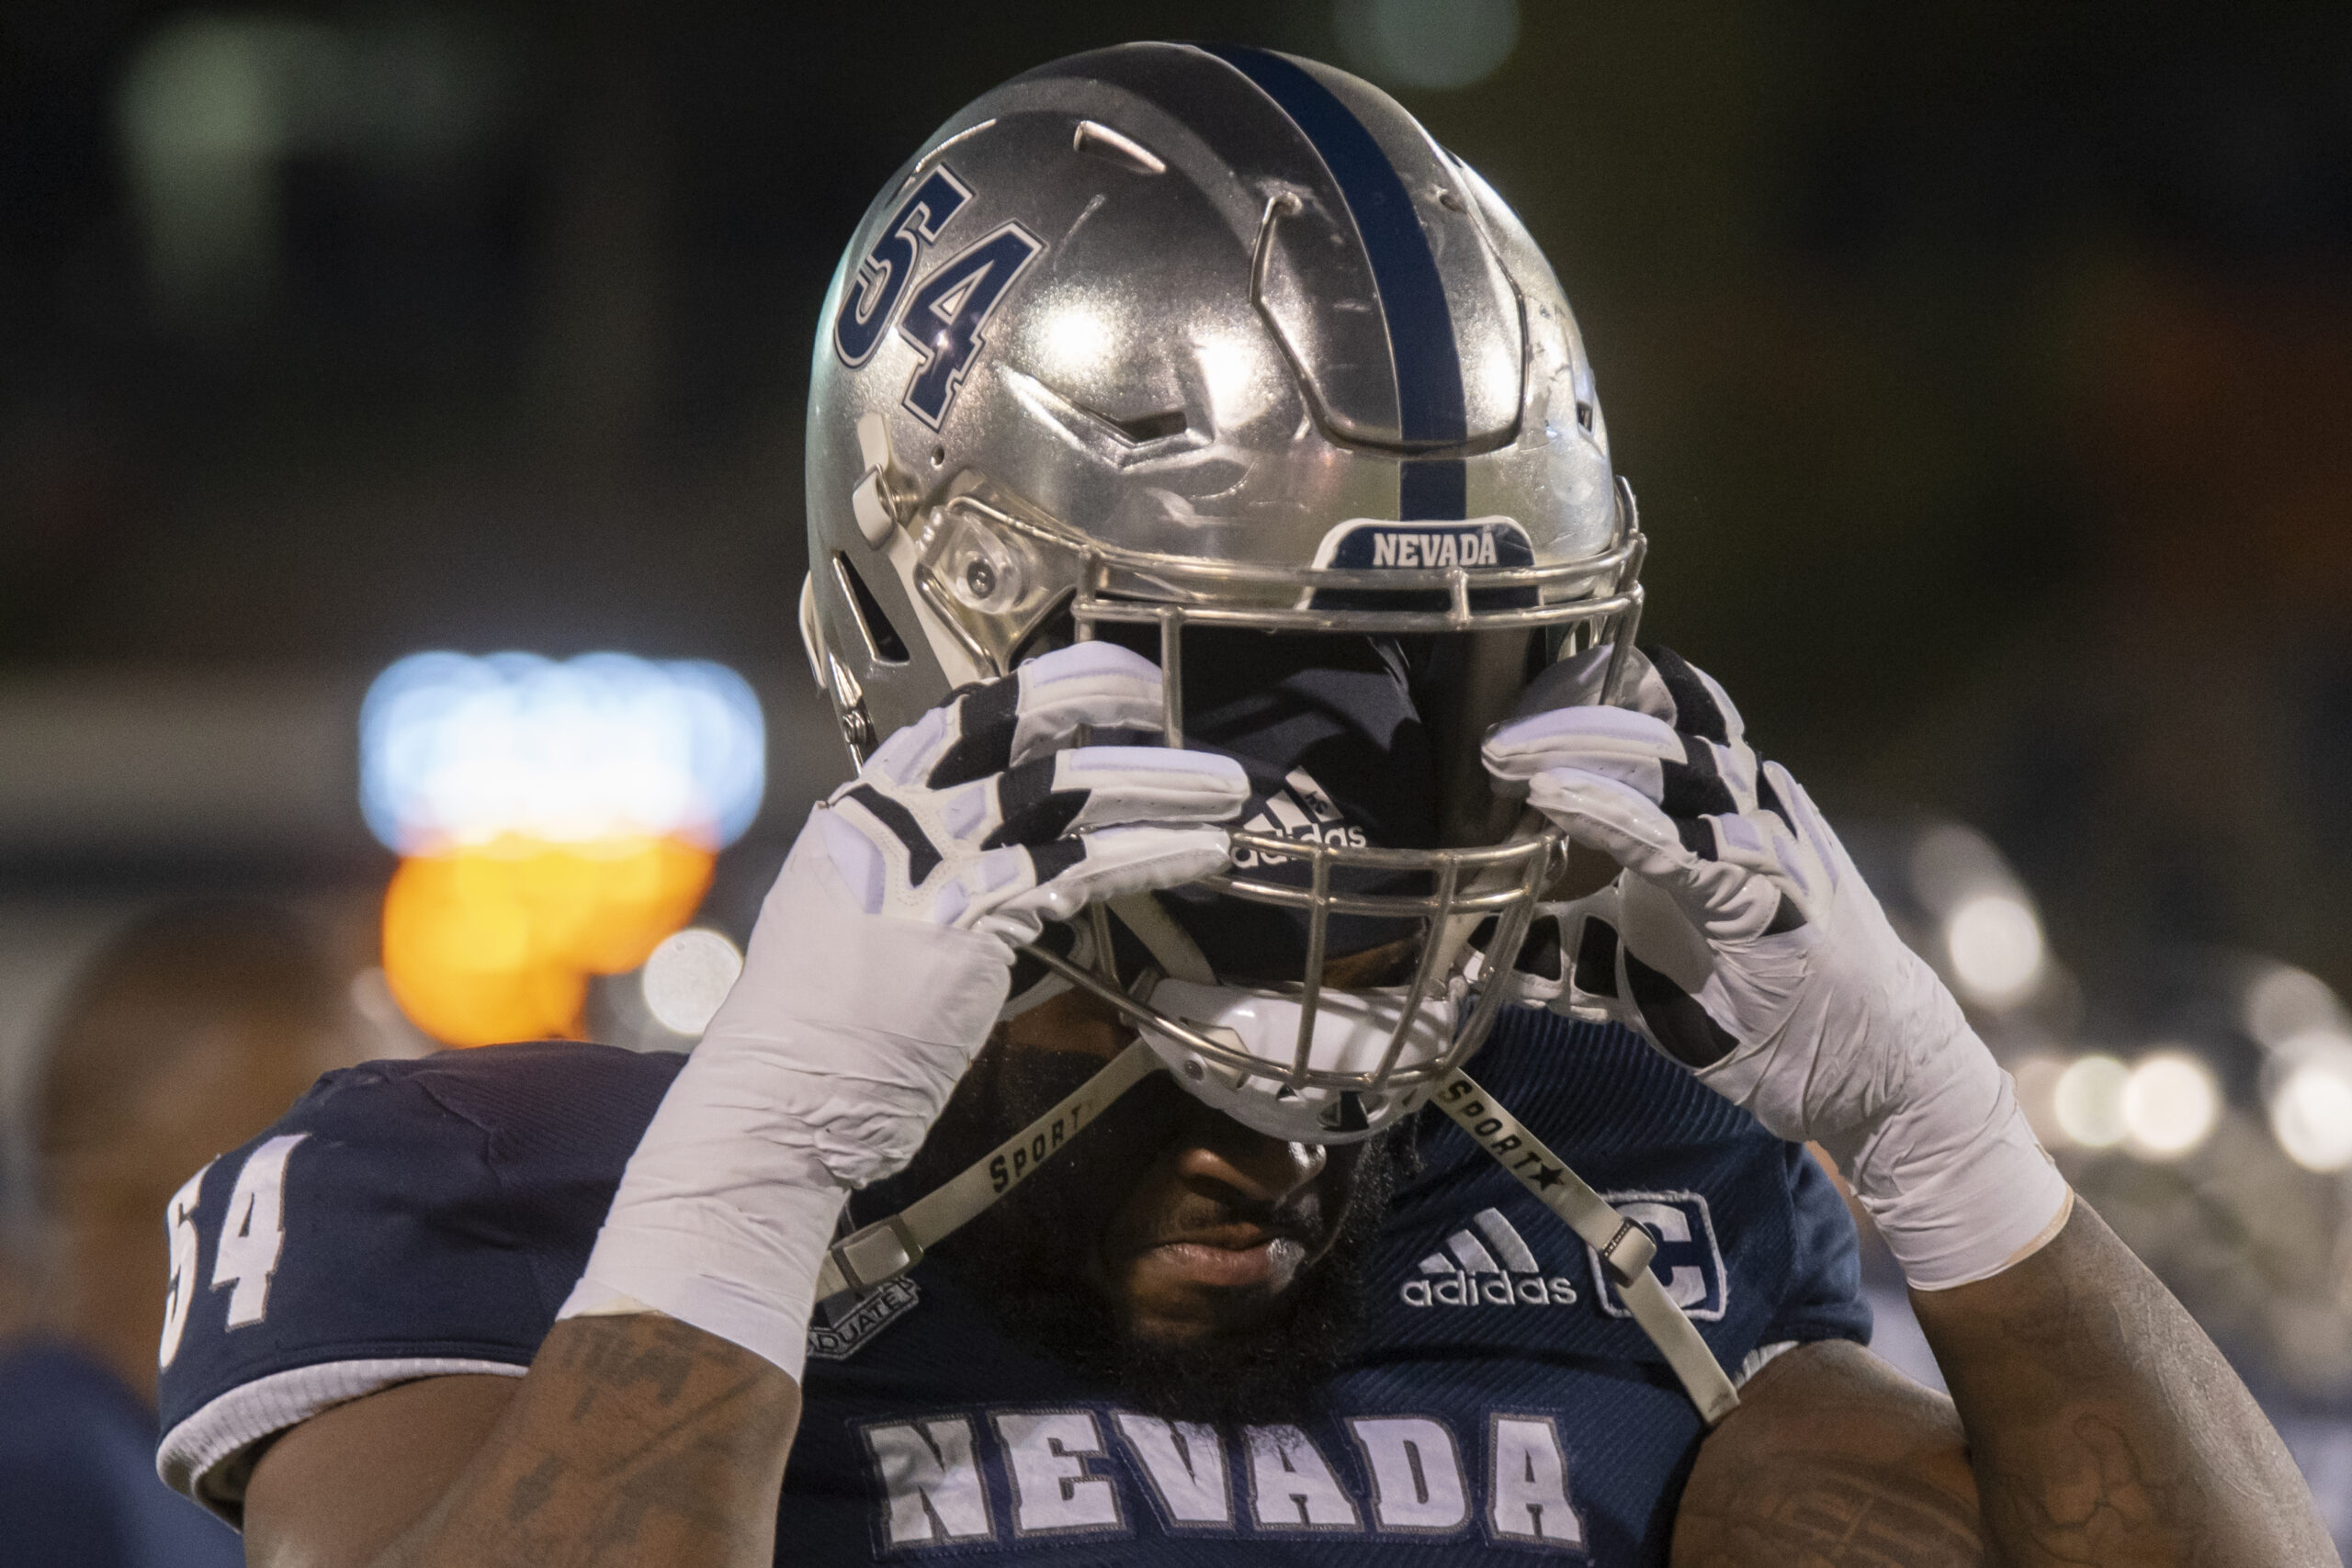 Nevada loses to San Jose State 35-28 in back and forth fight